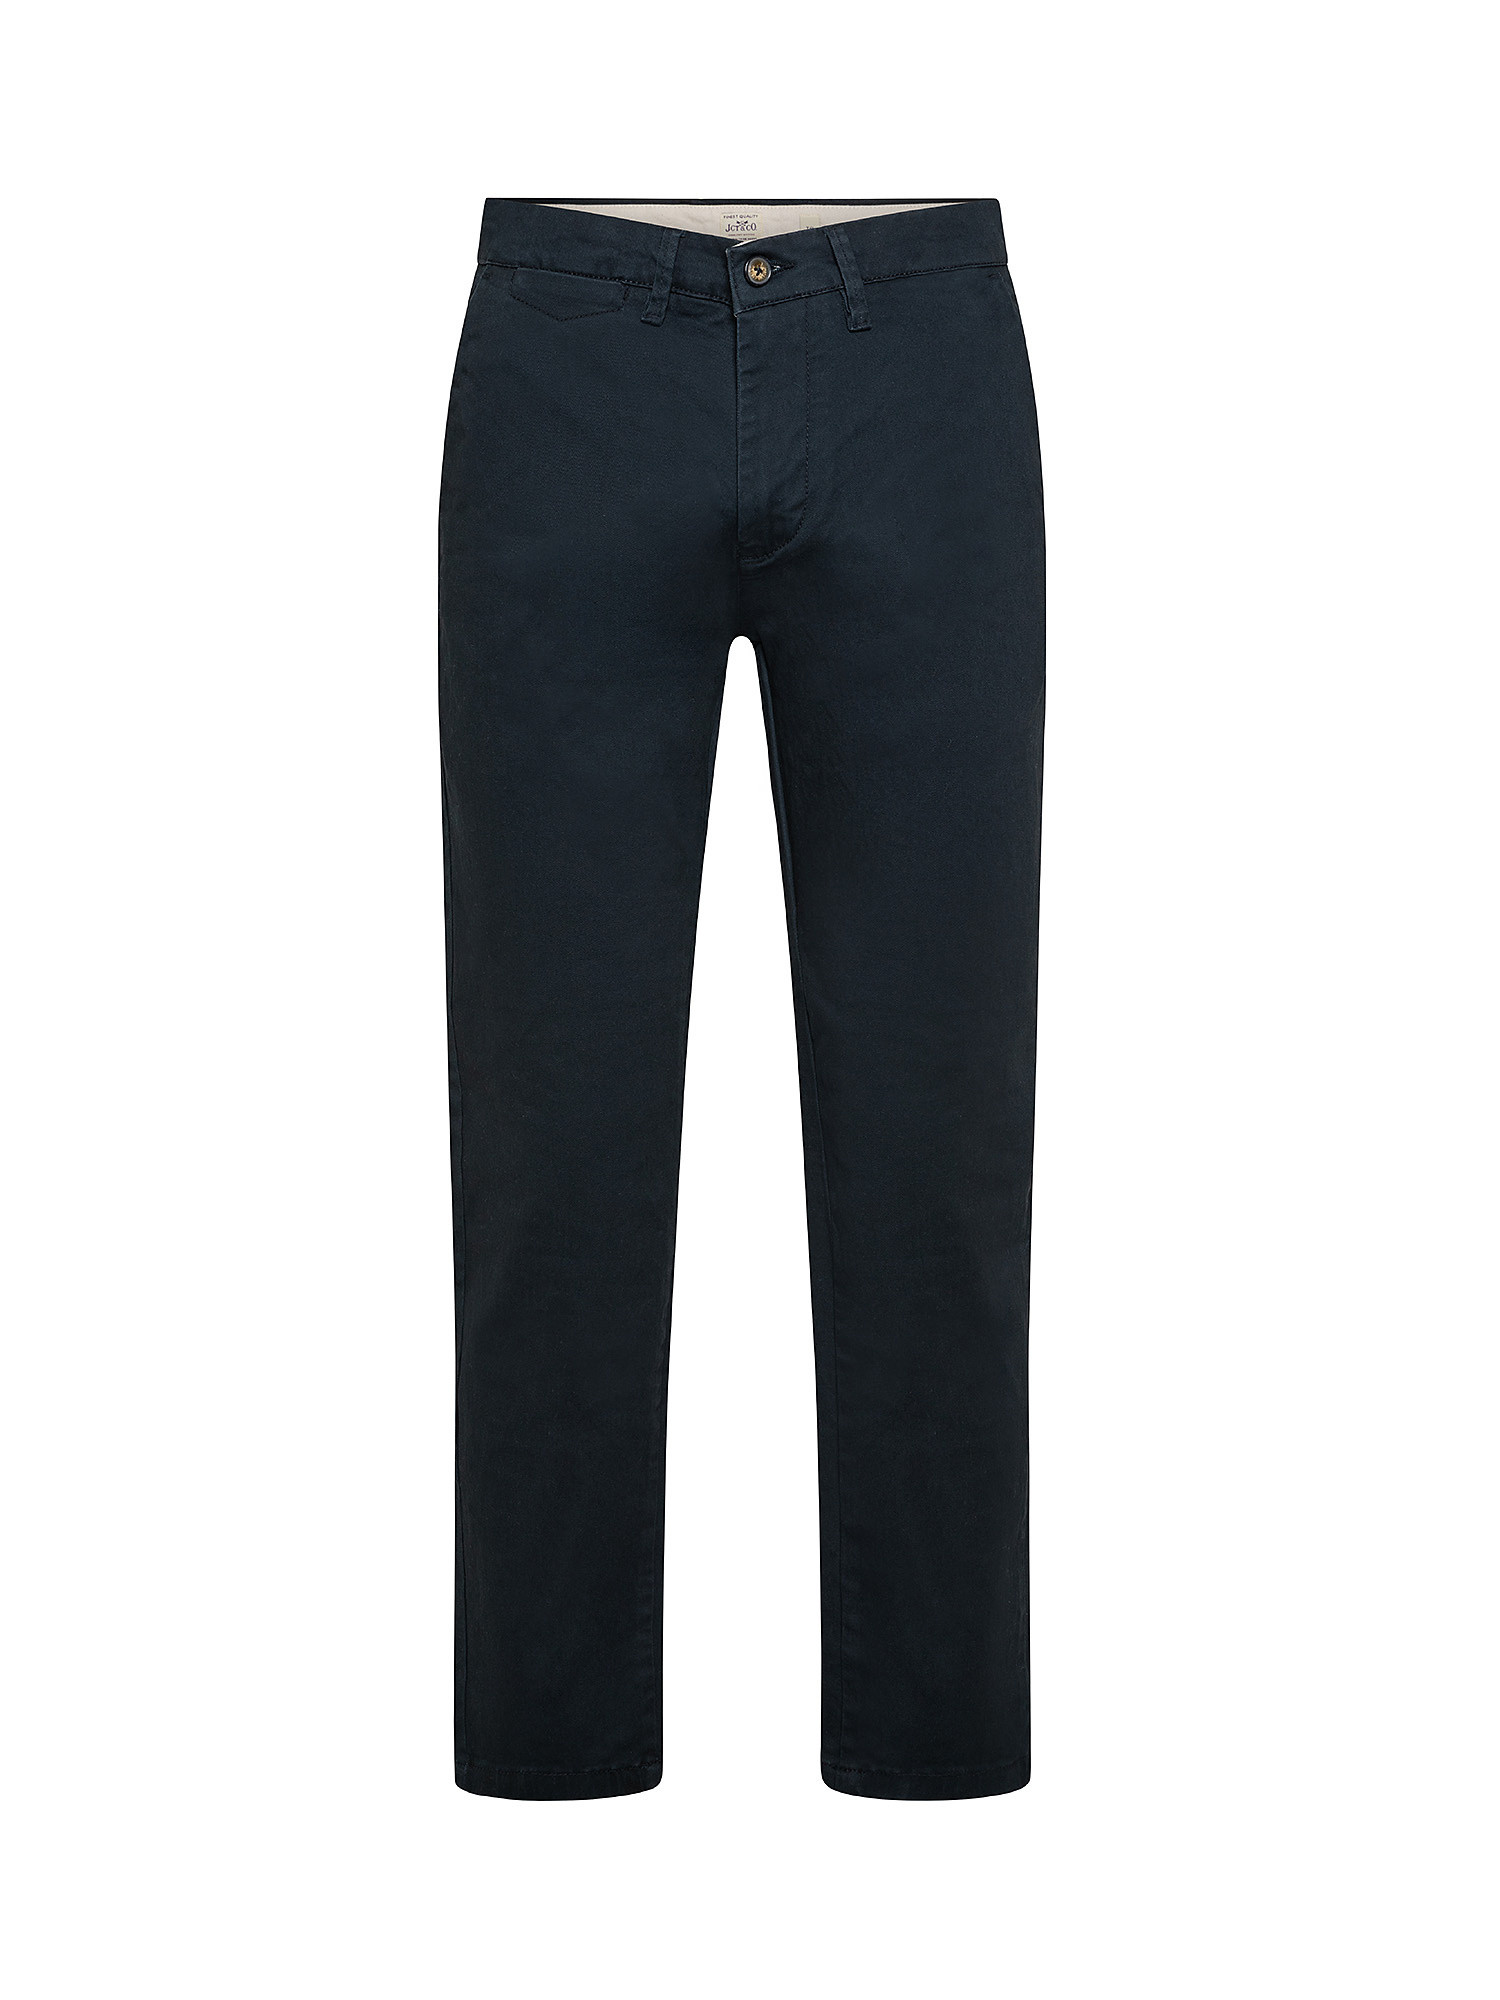 Stretch cotton chinos trousers, Dark Blue, large image number 0